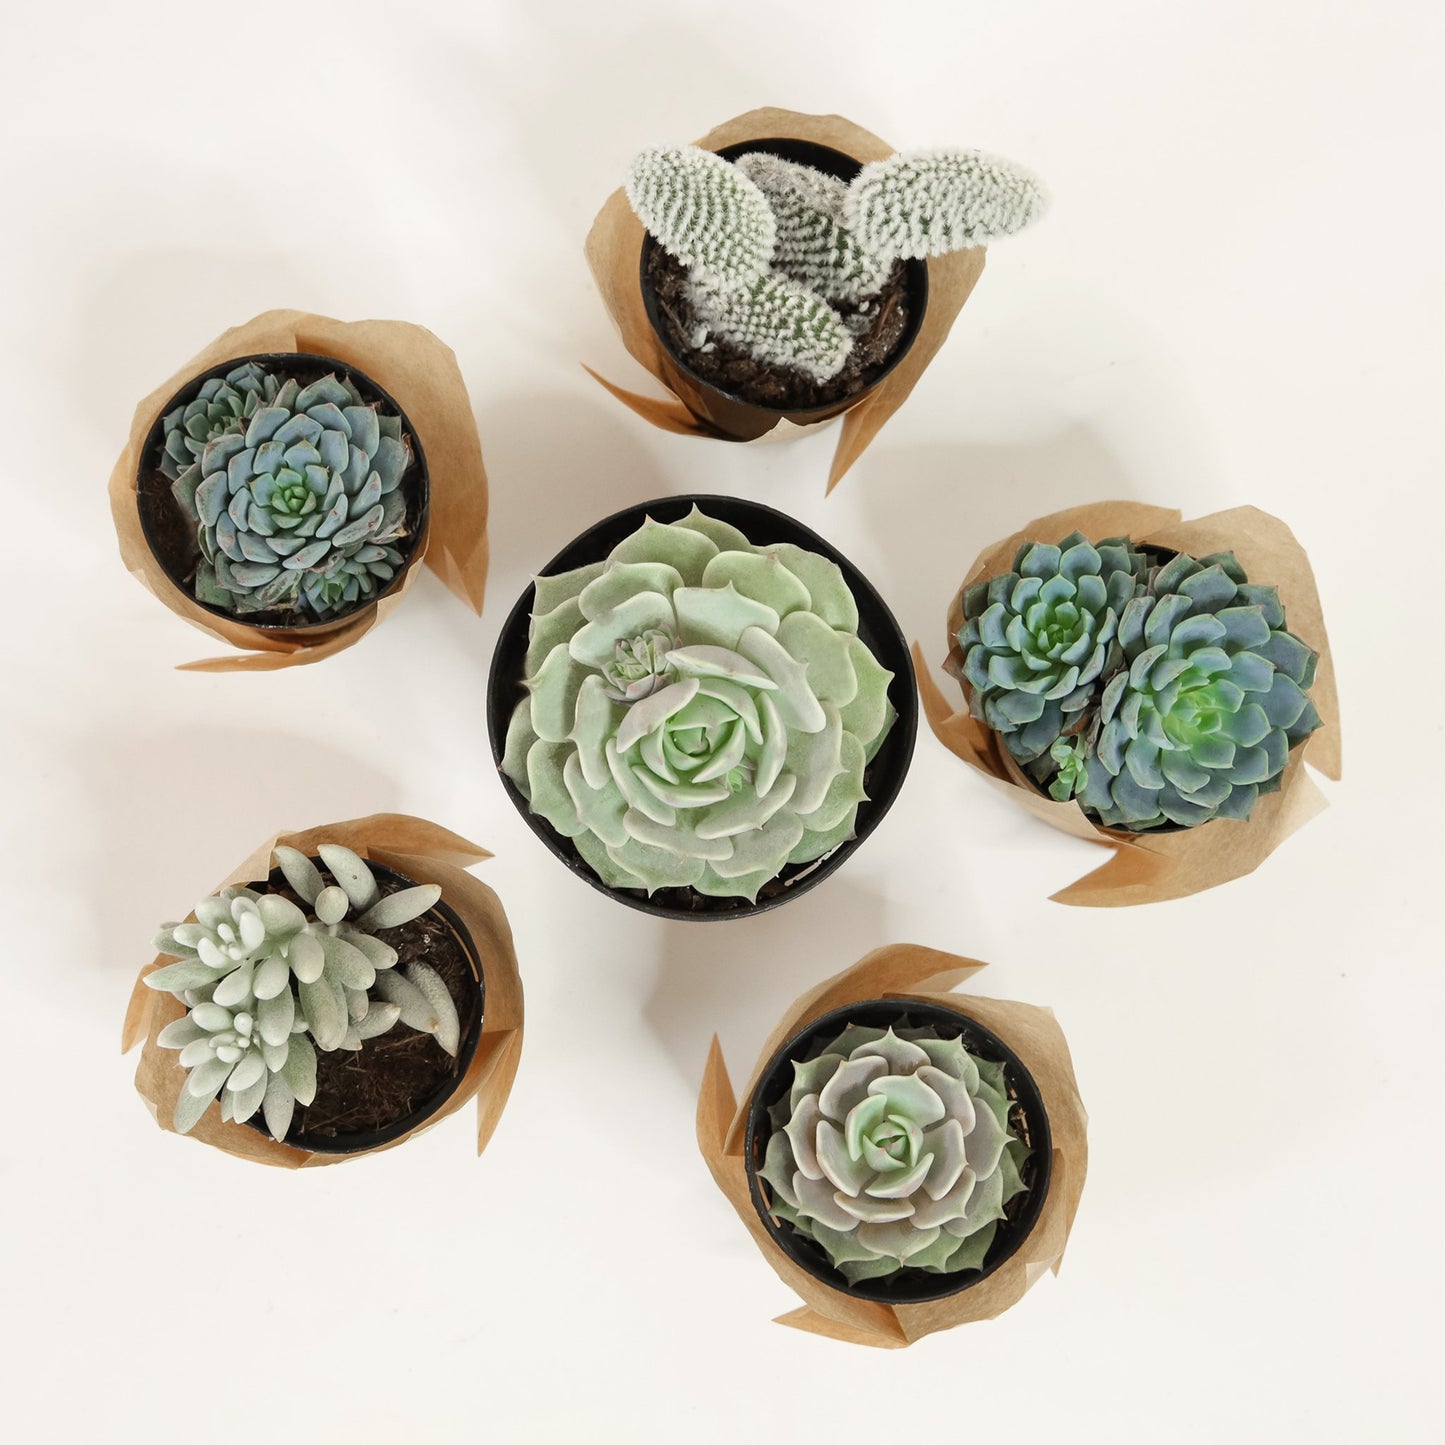  Five individual, 2 inch succulents of various shapes and sizes, along with one larger succulent picked for the large winter kit. Each succulent container is wrapped in brown craft paper.